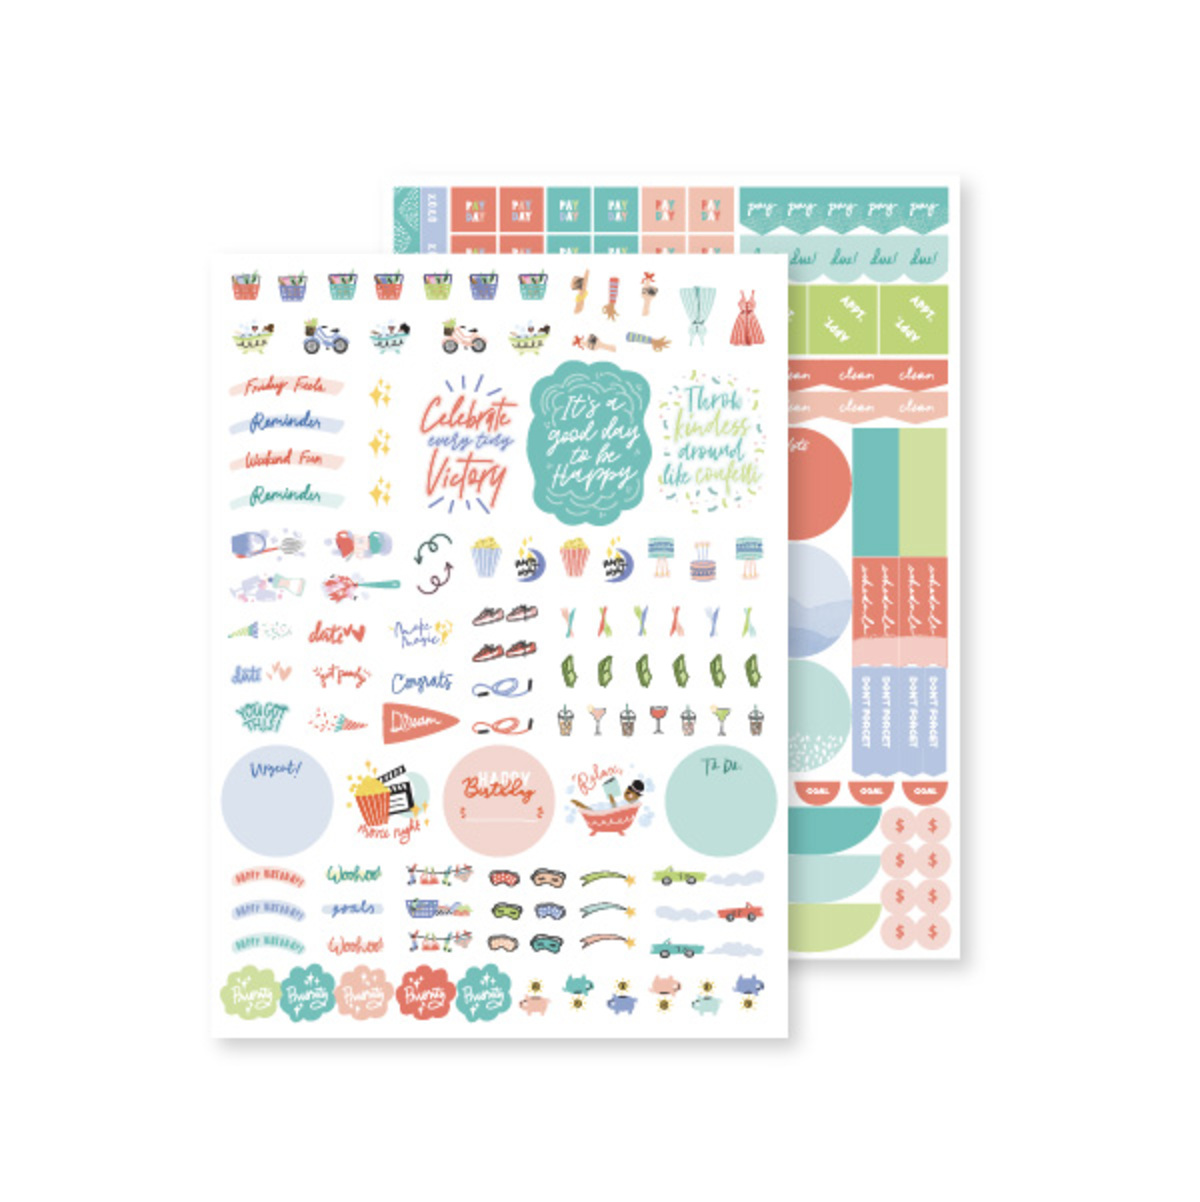 DON'T FORGET Stickers for Planner / Reminder Stickers / to Do